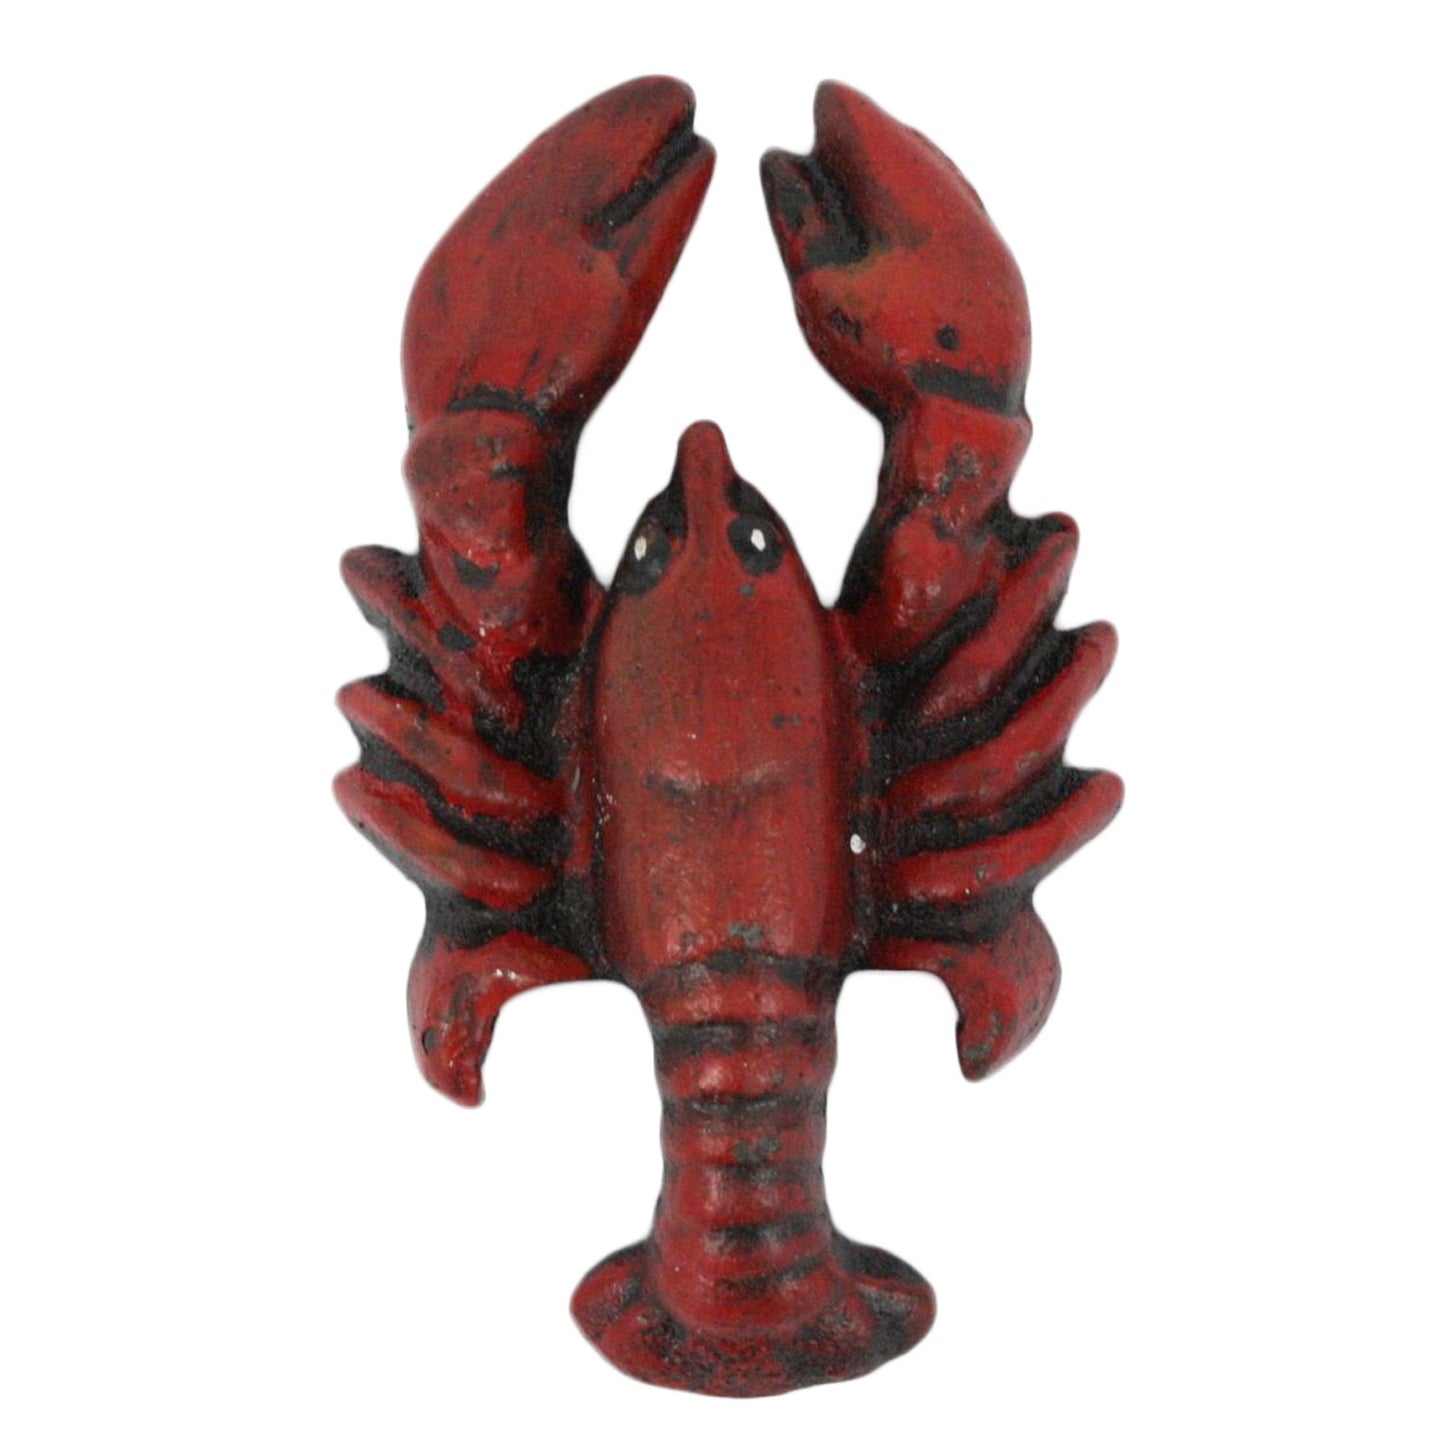 Image of a red cast iron bottle opener.